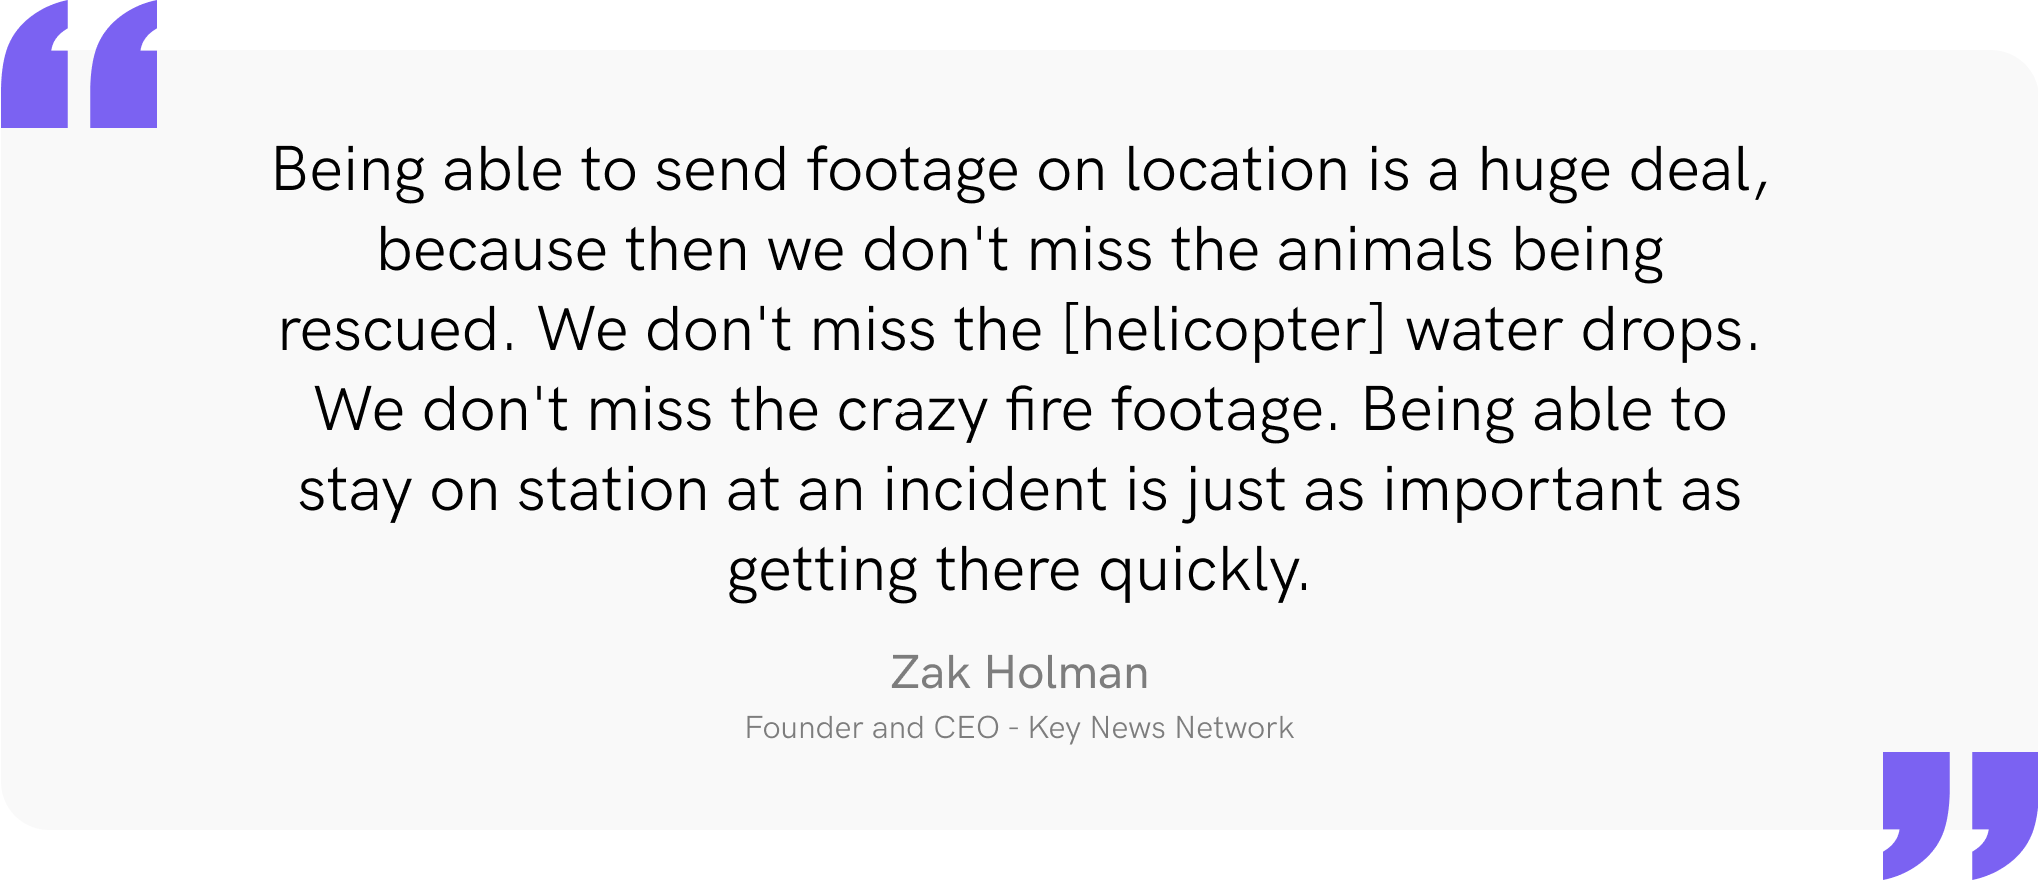 Being able to send footage on location is a huge deal, because then we don't miss the animals being rescued. We don't miss the [helicopter] water drops. We don't miss the crazy fire footage. Being able to stay on station at an incident is just as important as getting there quickly.